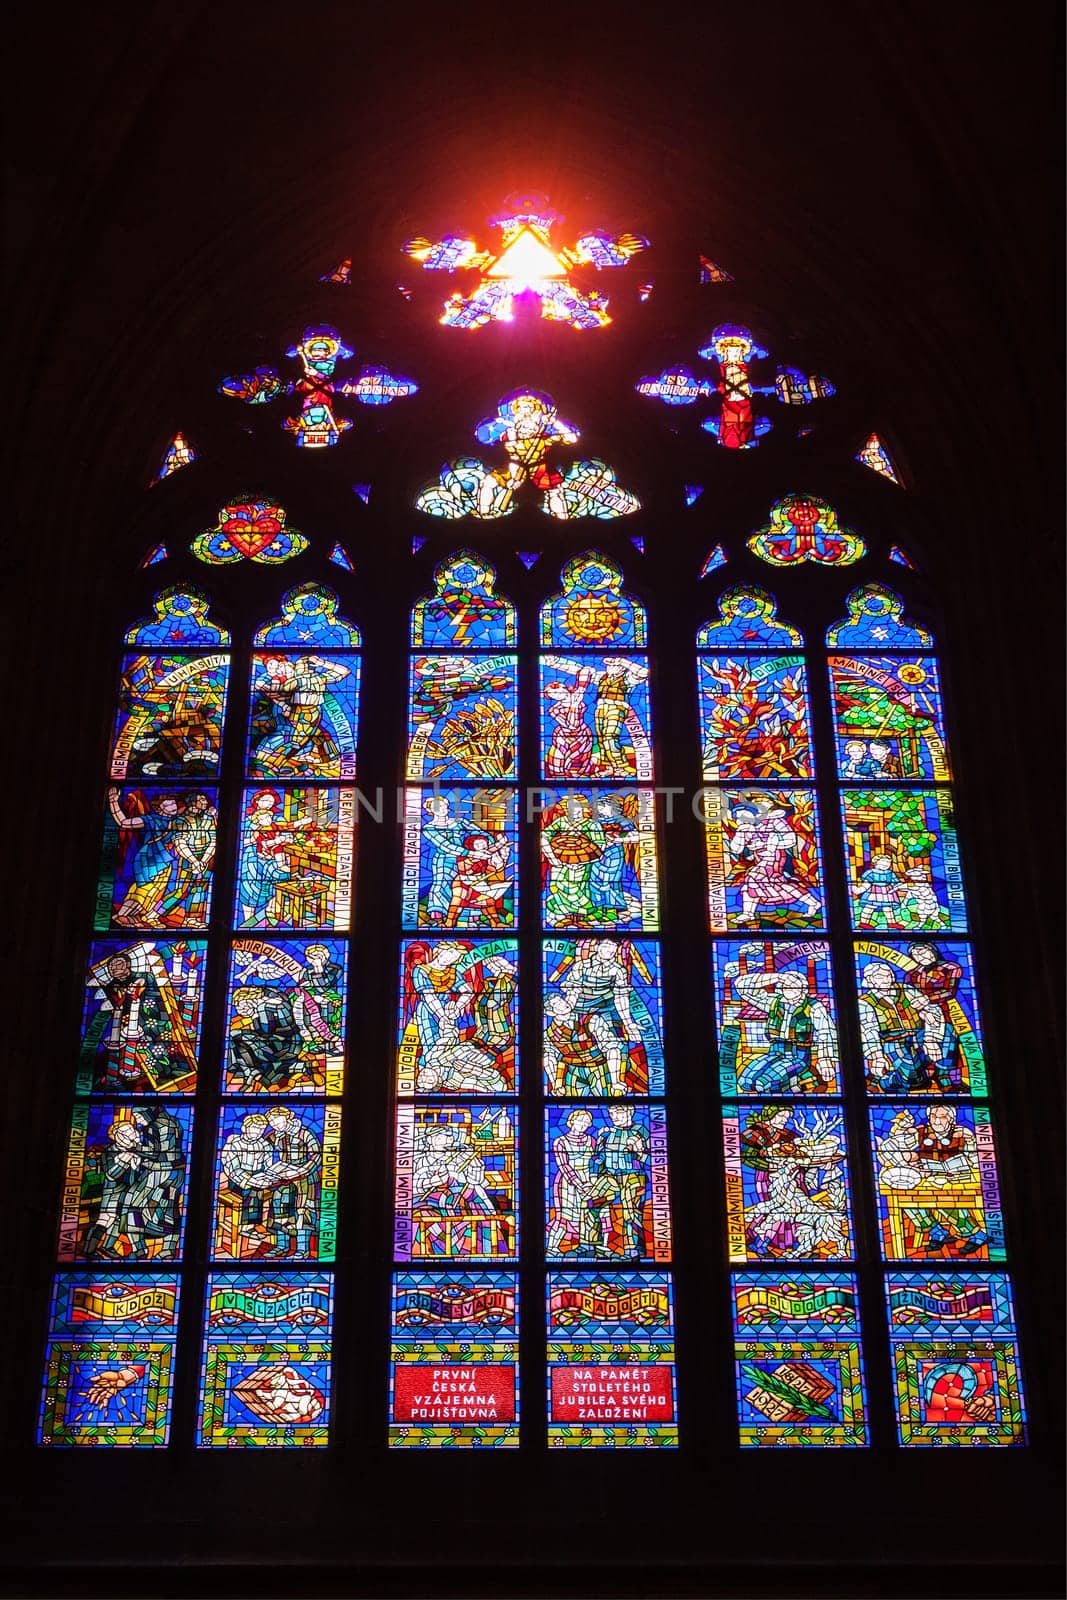 Stained-glass Window designed by famous Czech Art Nouveau painter Alfons Mucha in St. Vitus cathedral by dimol